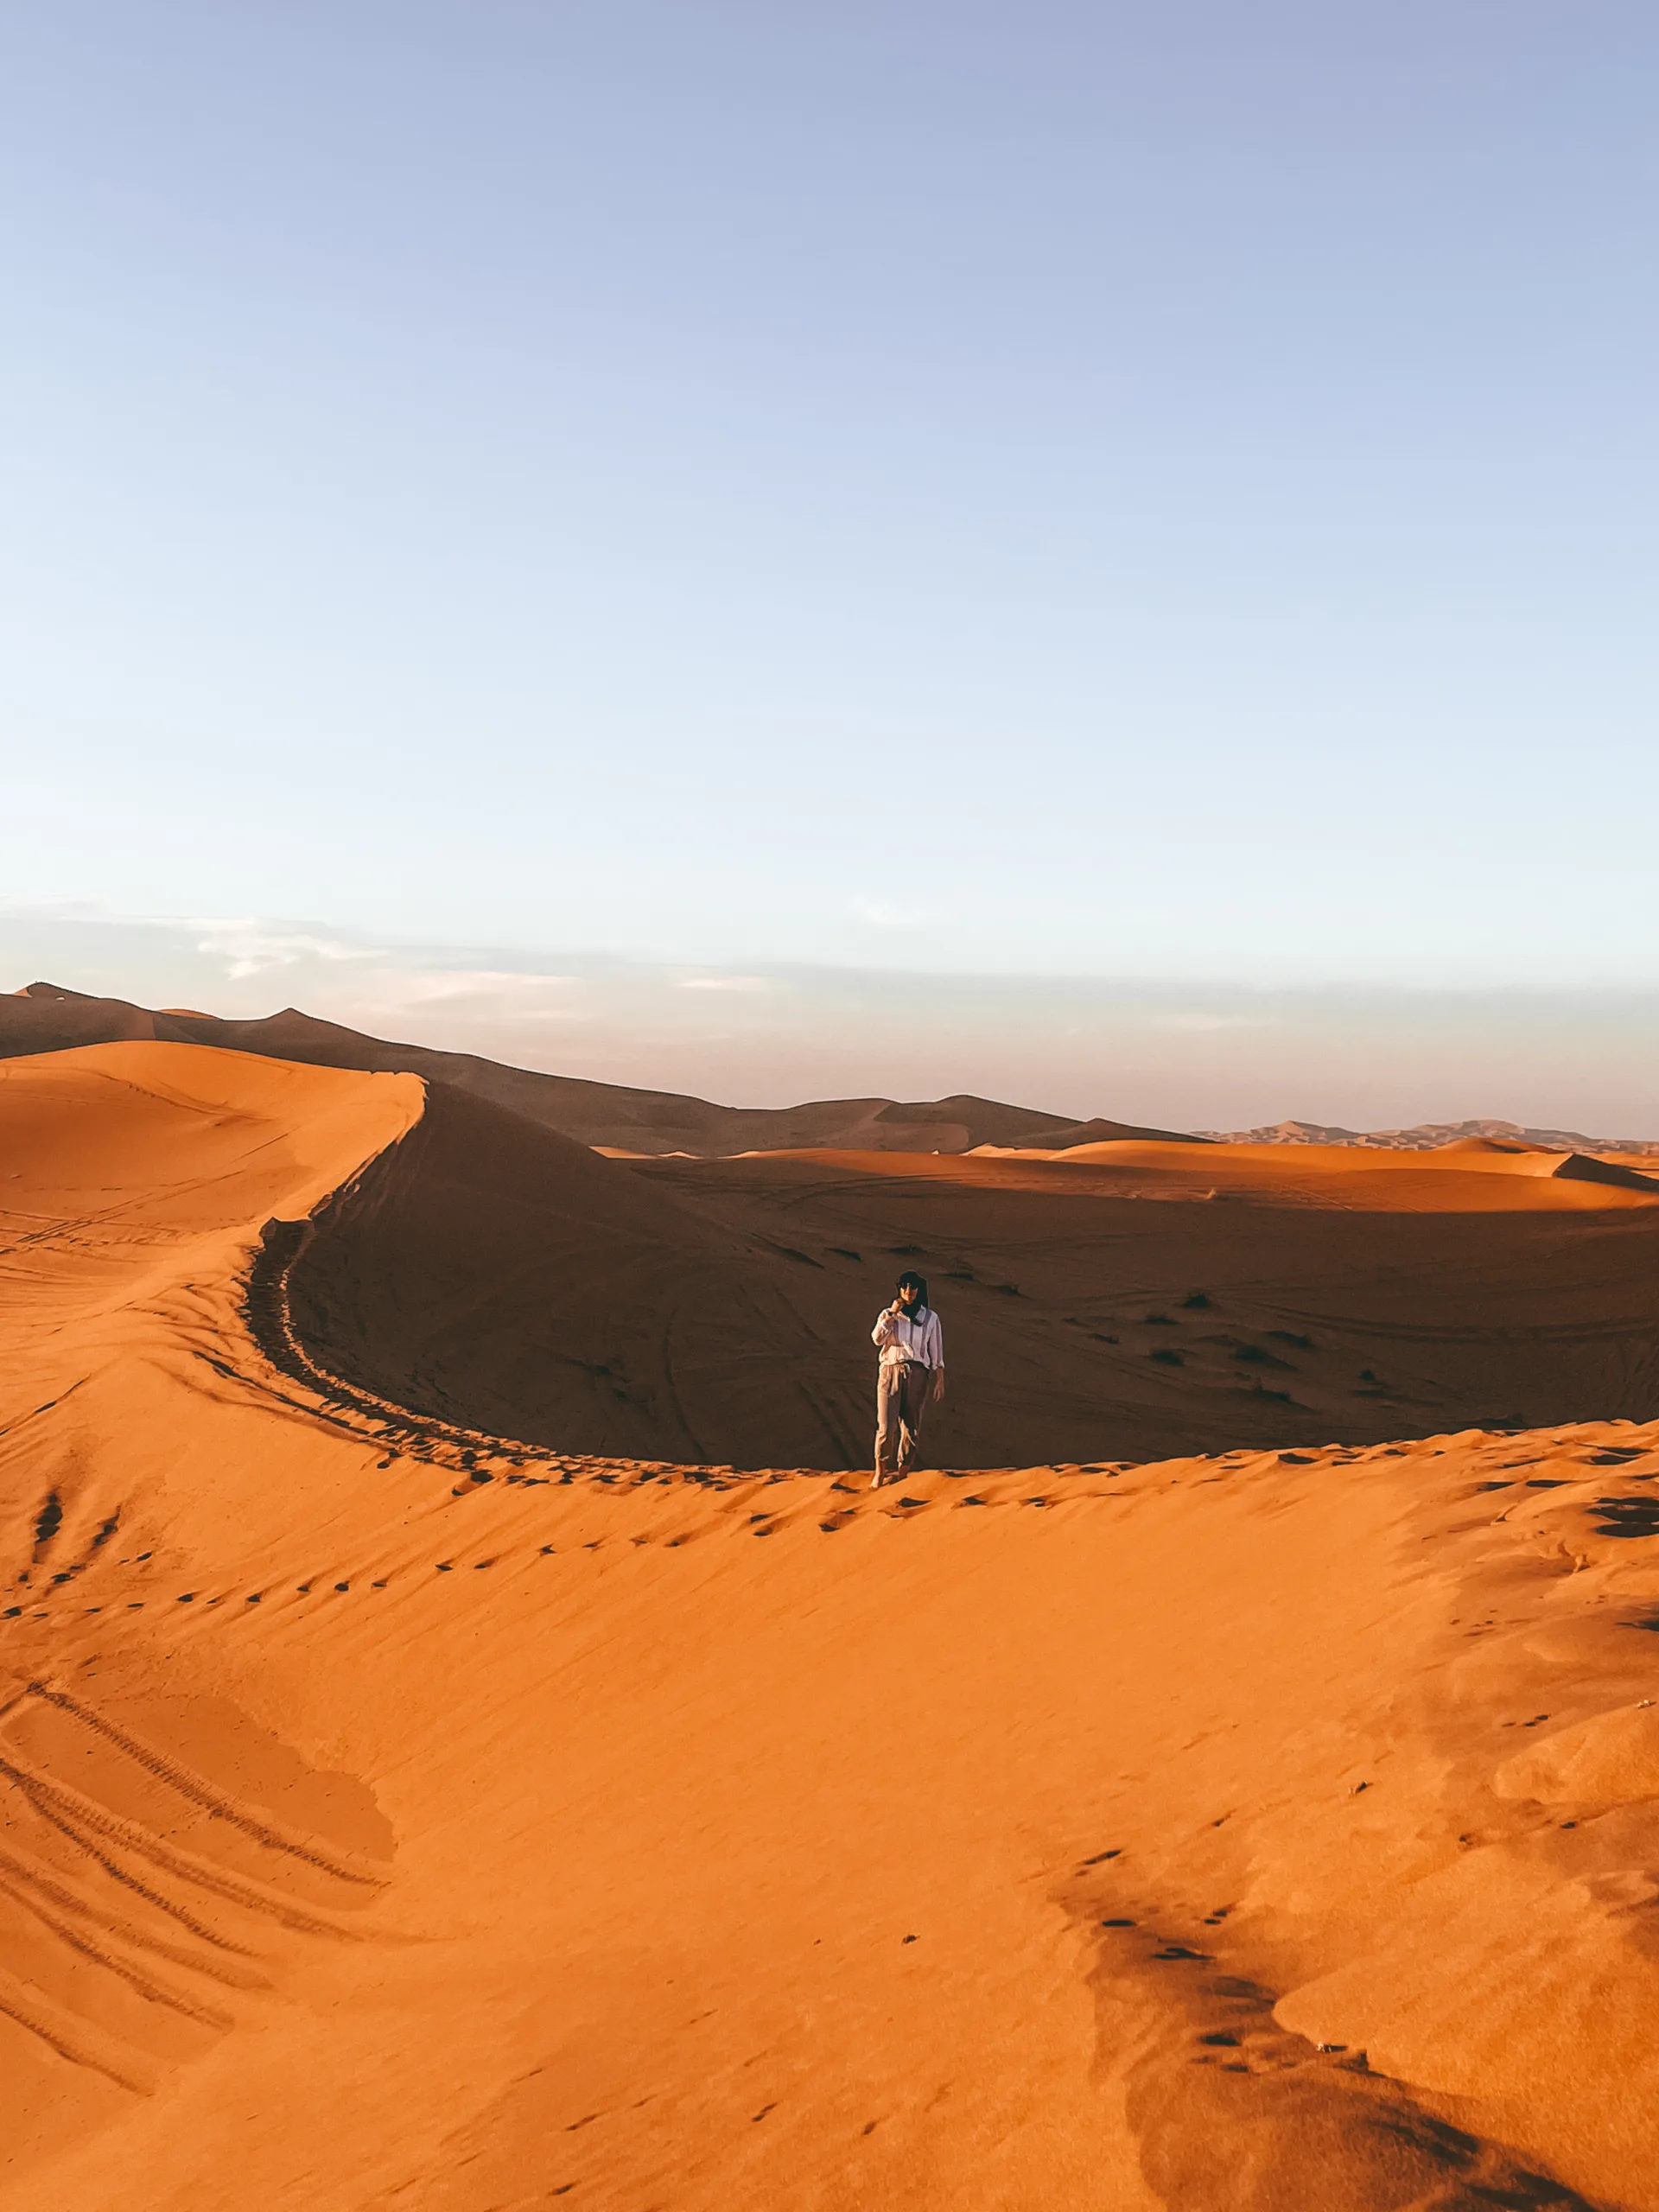 Someone in the distance standing on a desert dune in the Sahara